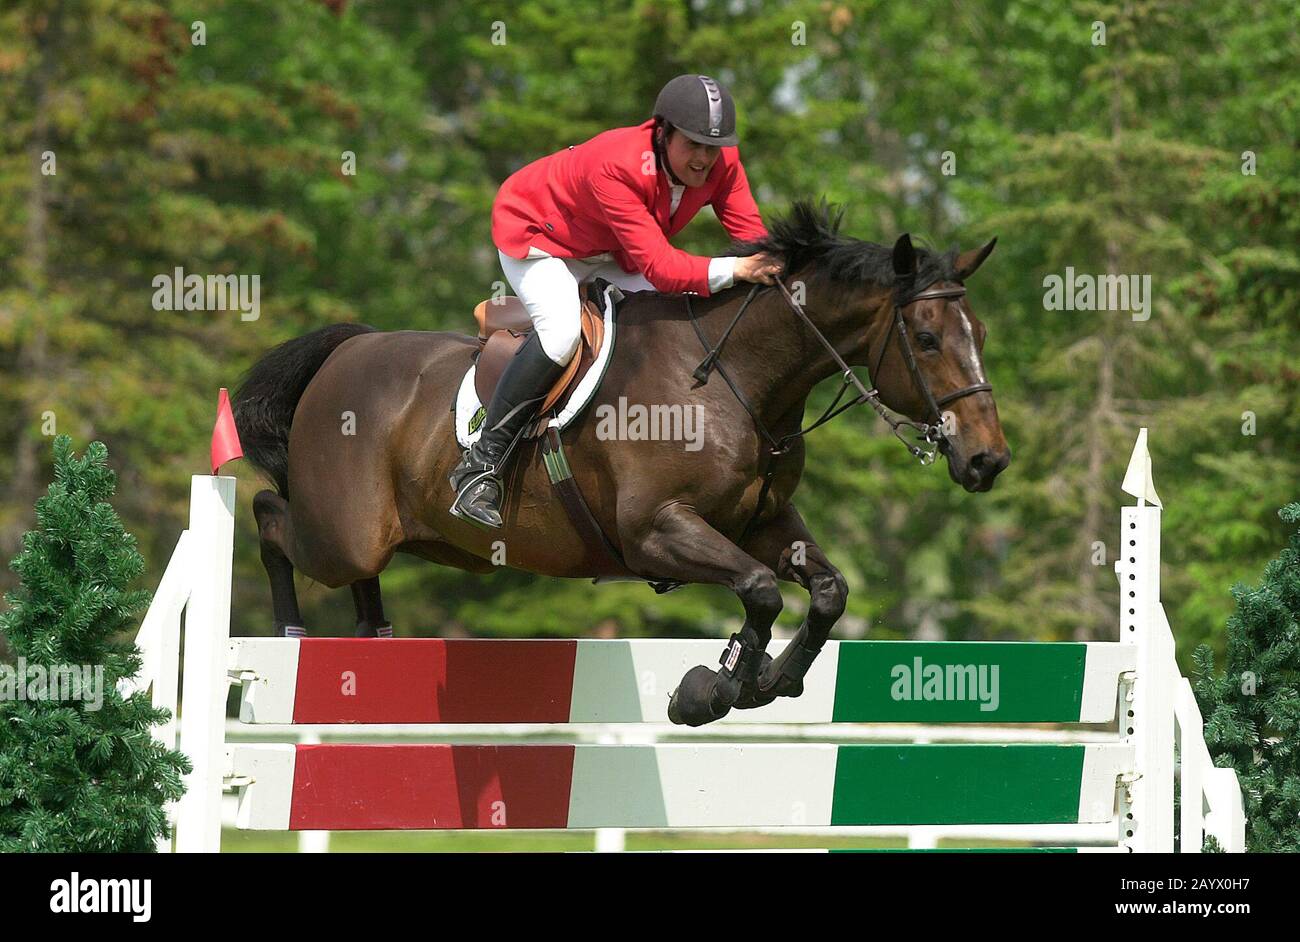 Spruce Meadows National 2004 Dow Chemical Cup, Andrew Davies, Great Britain riding Ashley III Stock Photo